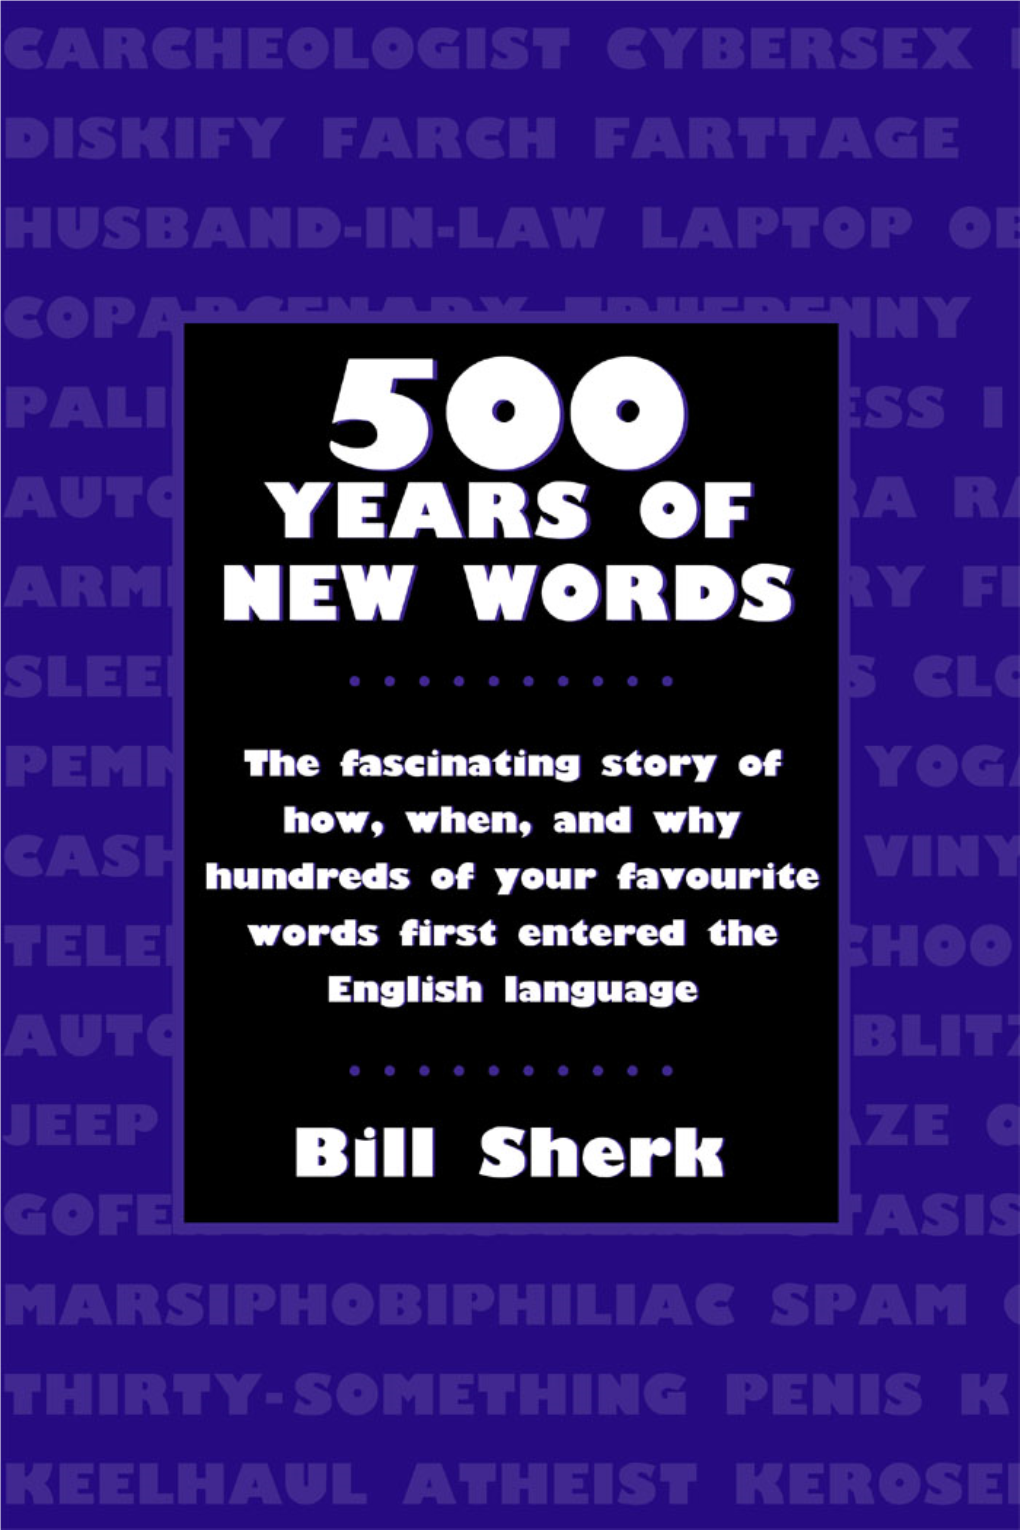 500 YEARS of NEW WORDS to My Two Wonderful Children, Jeffrey and Juliana 500 YEARS of NEW WORDS by BILL SHERK